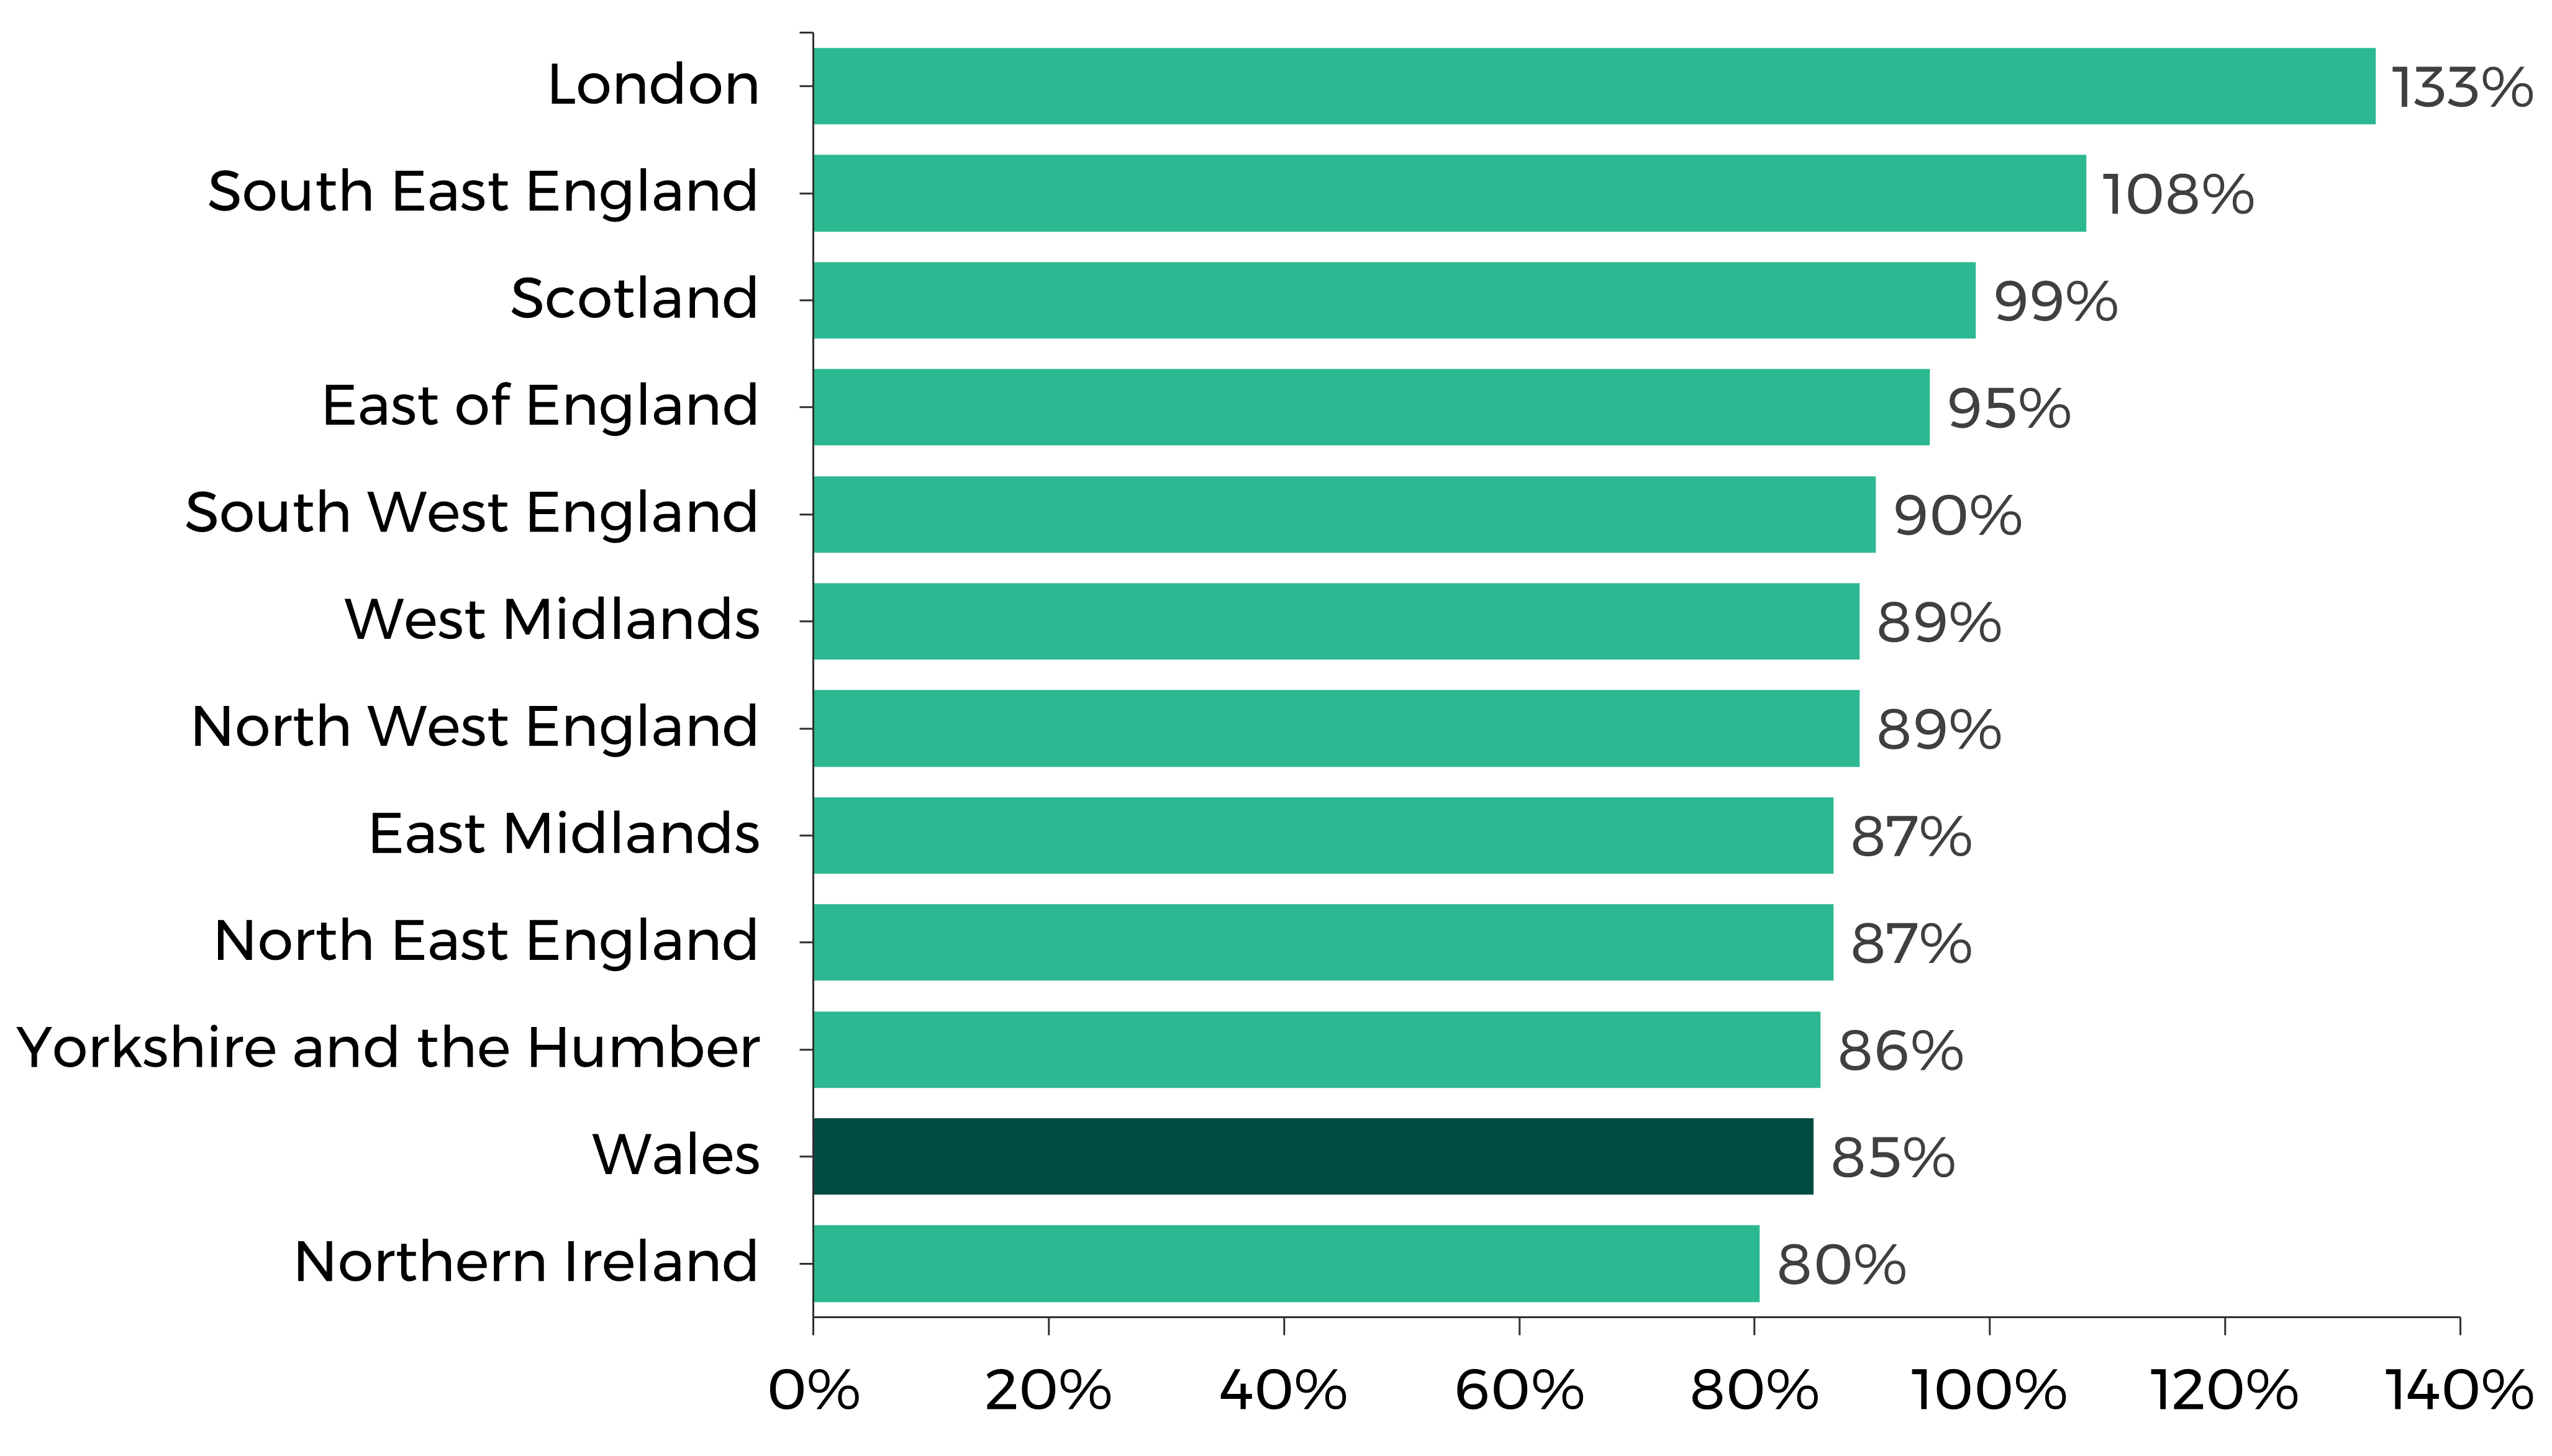 Northern Ireland 80%, Wales 85%, Yorkshire and the Humber 86%, North East England 87%, East Midlands 87%, North West England 89%, West Midlands 89%, South West England 90%, East of England 95%, Scotland 99%, South East England 108%, London 133%.